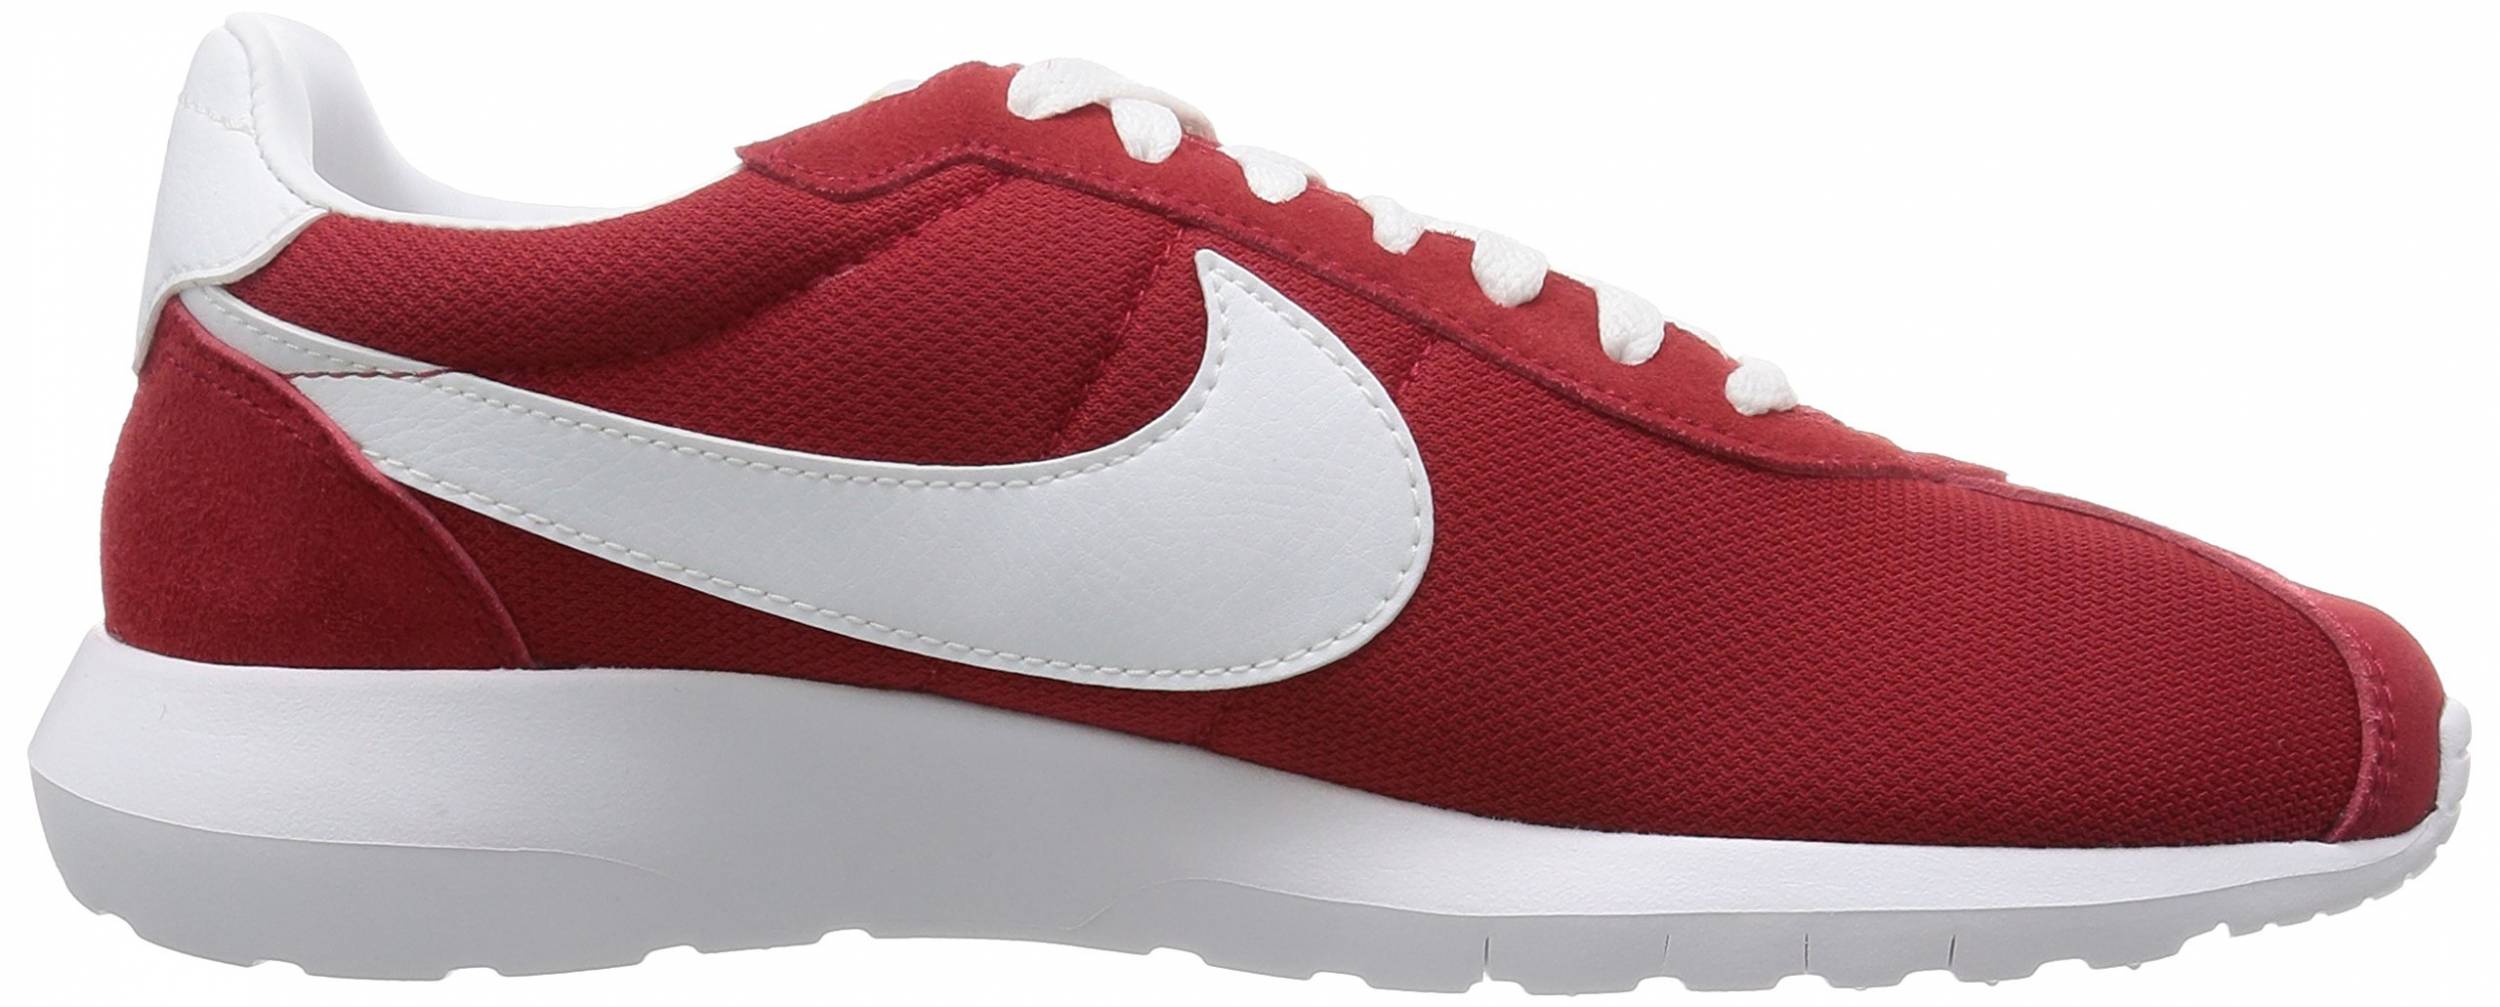 red roshe shoes